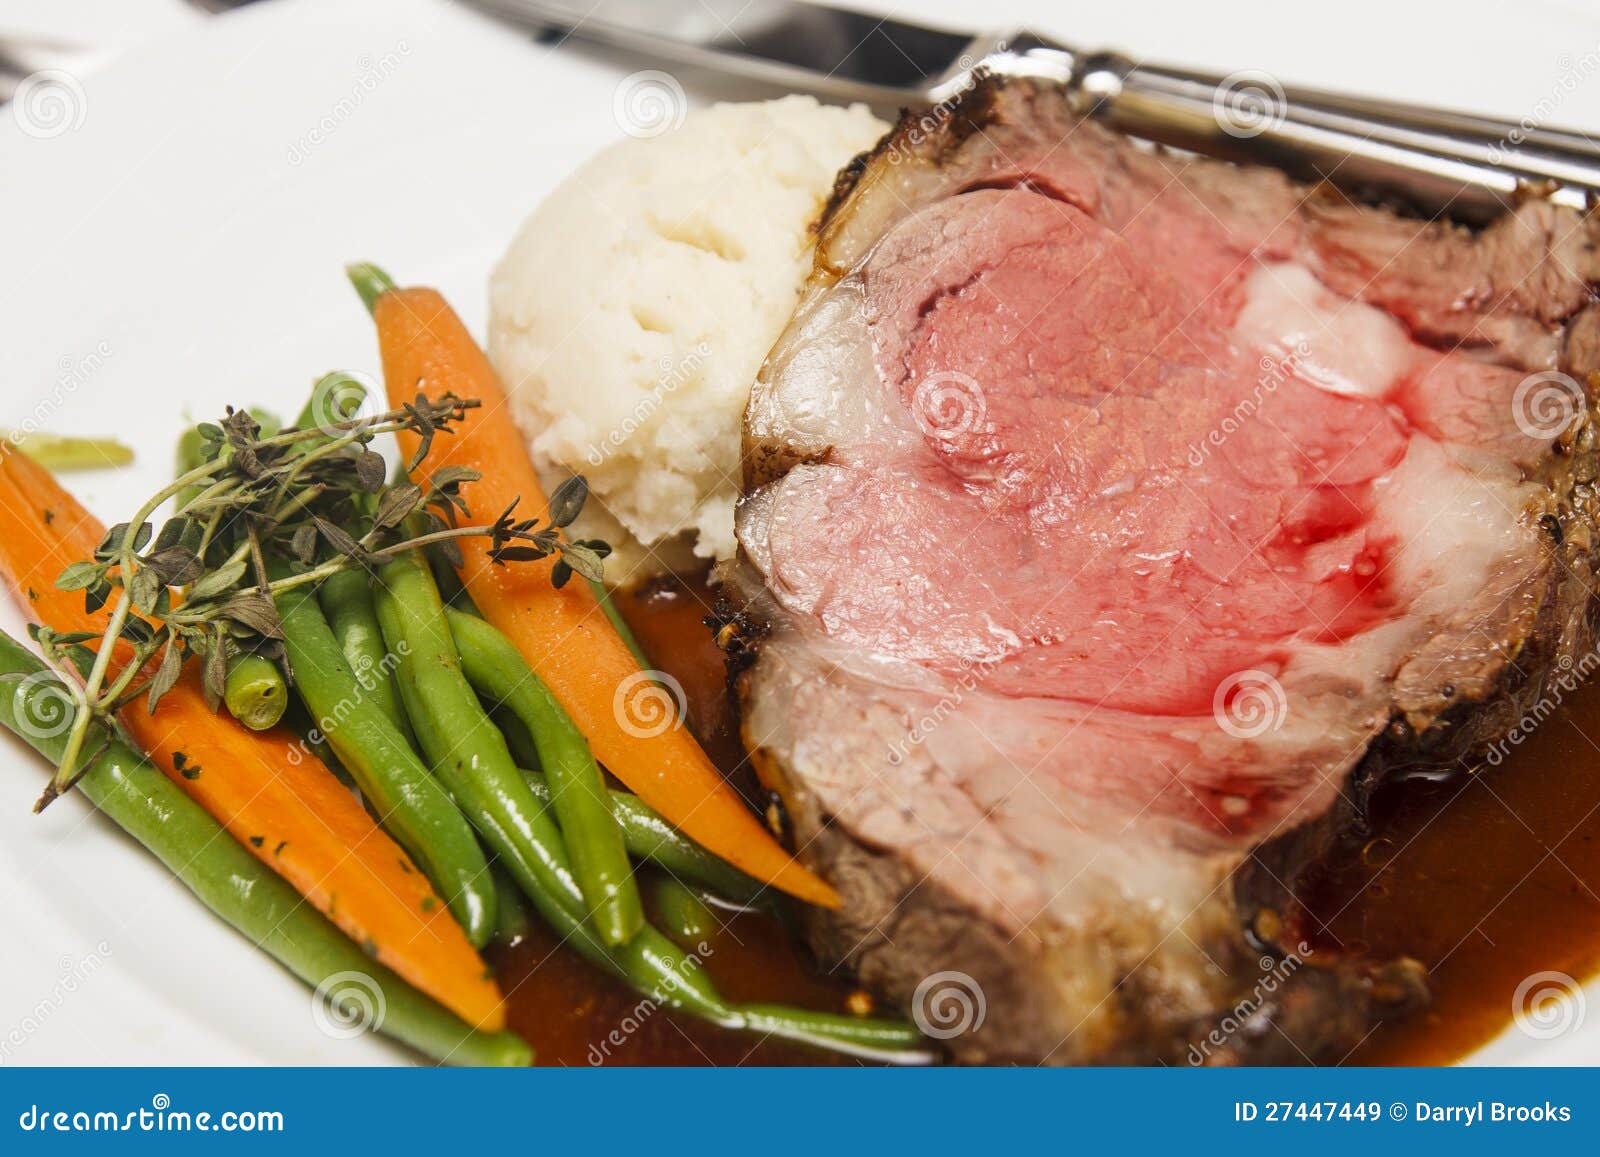 Prime Rib With Vegetables And Potatoes Stock Image - Image of steak, dish: 27447449